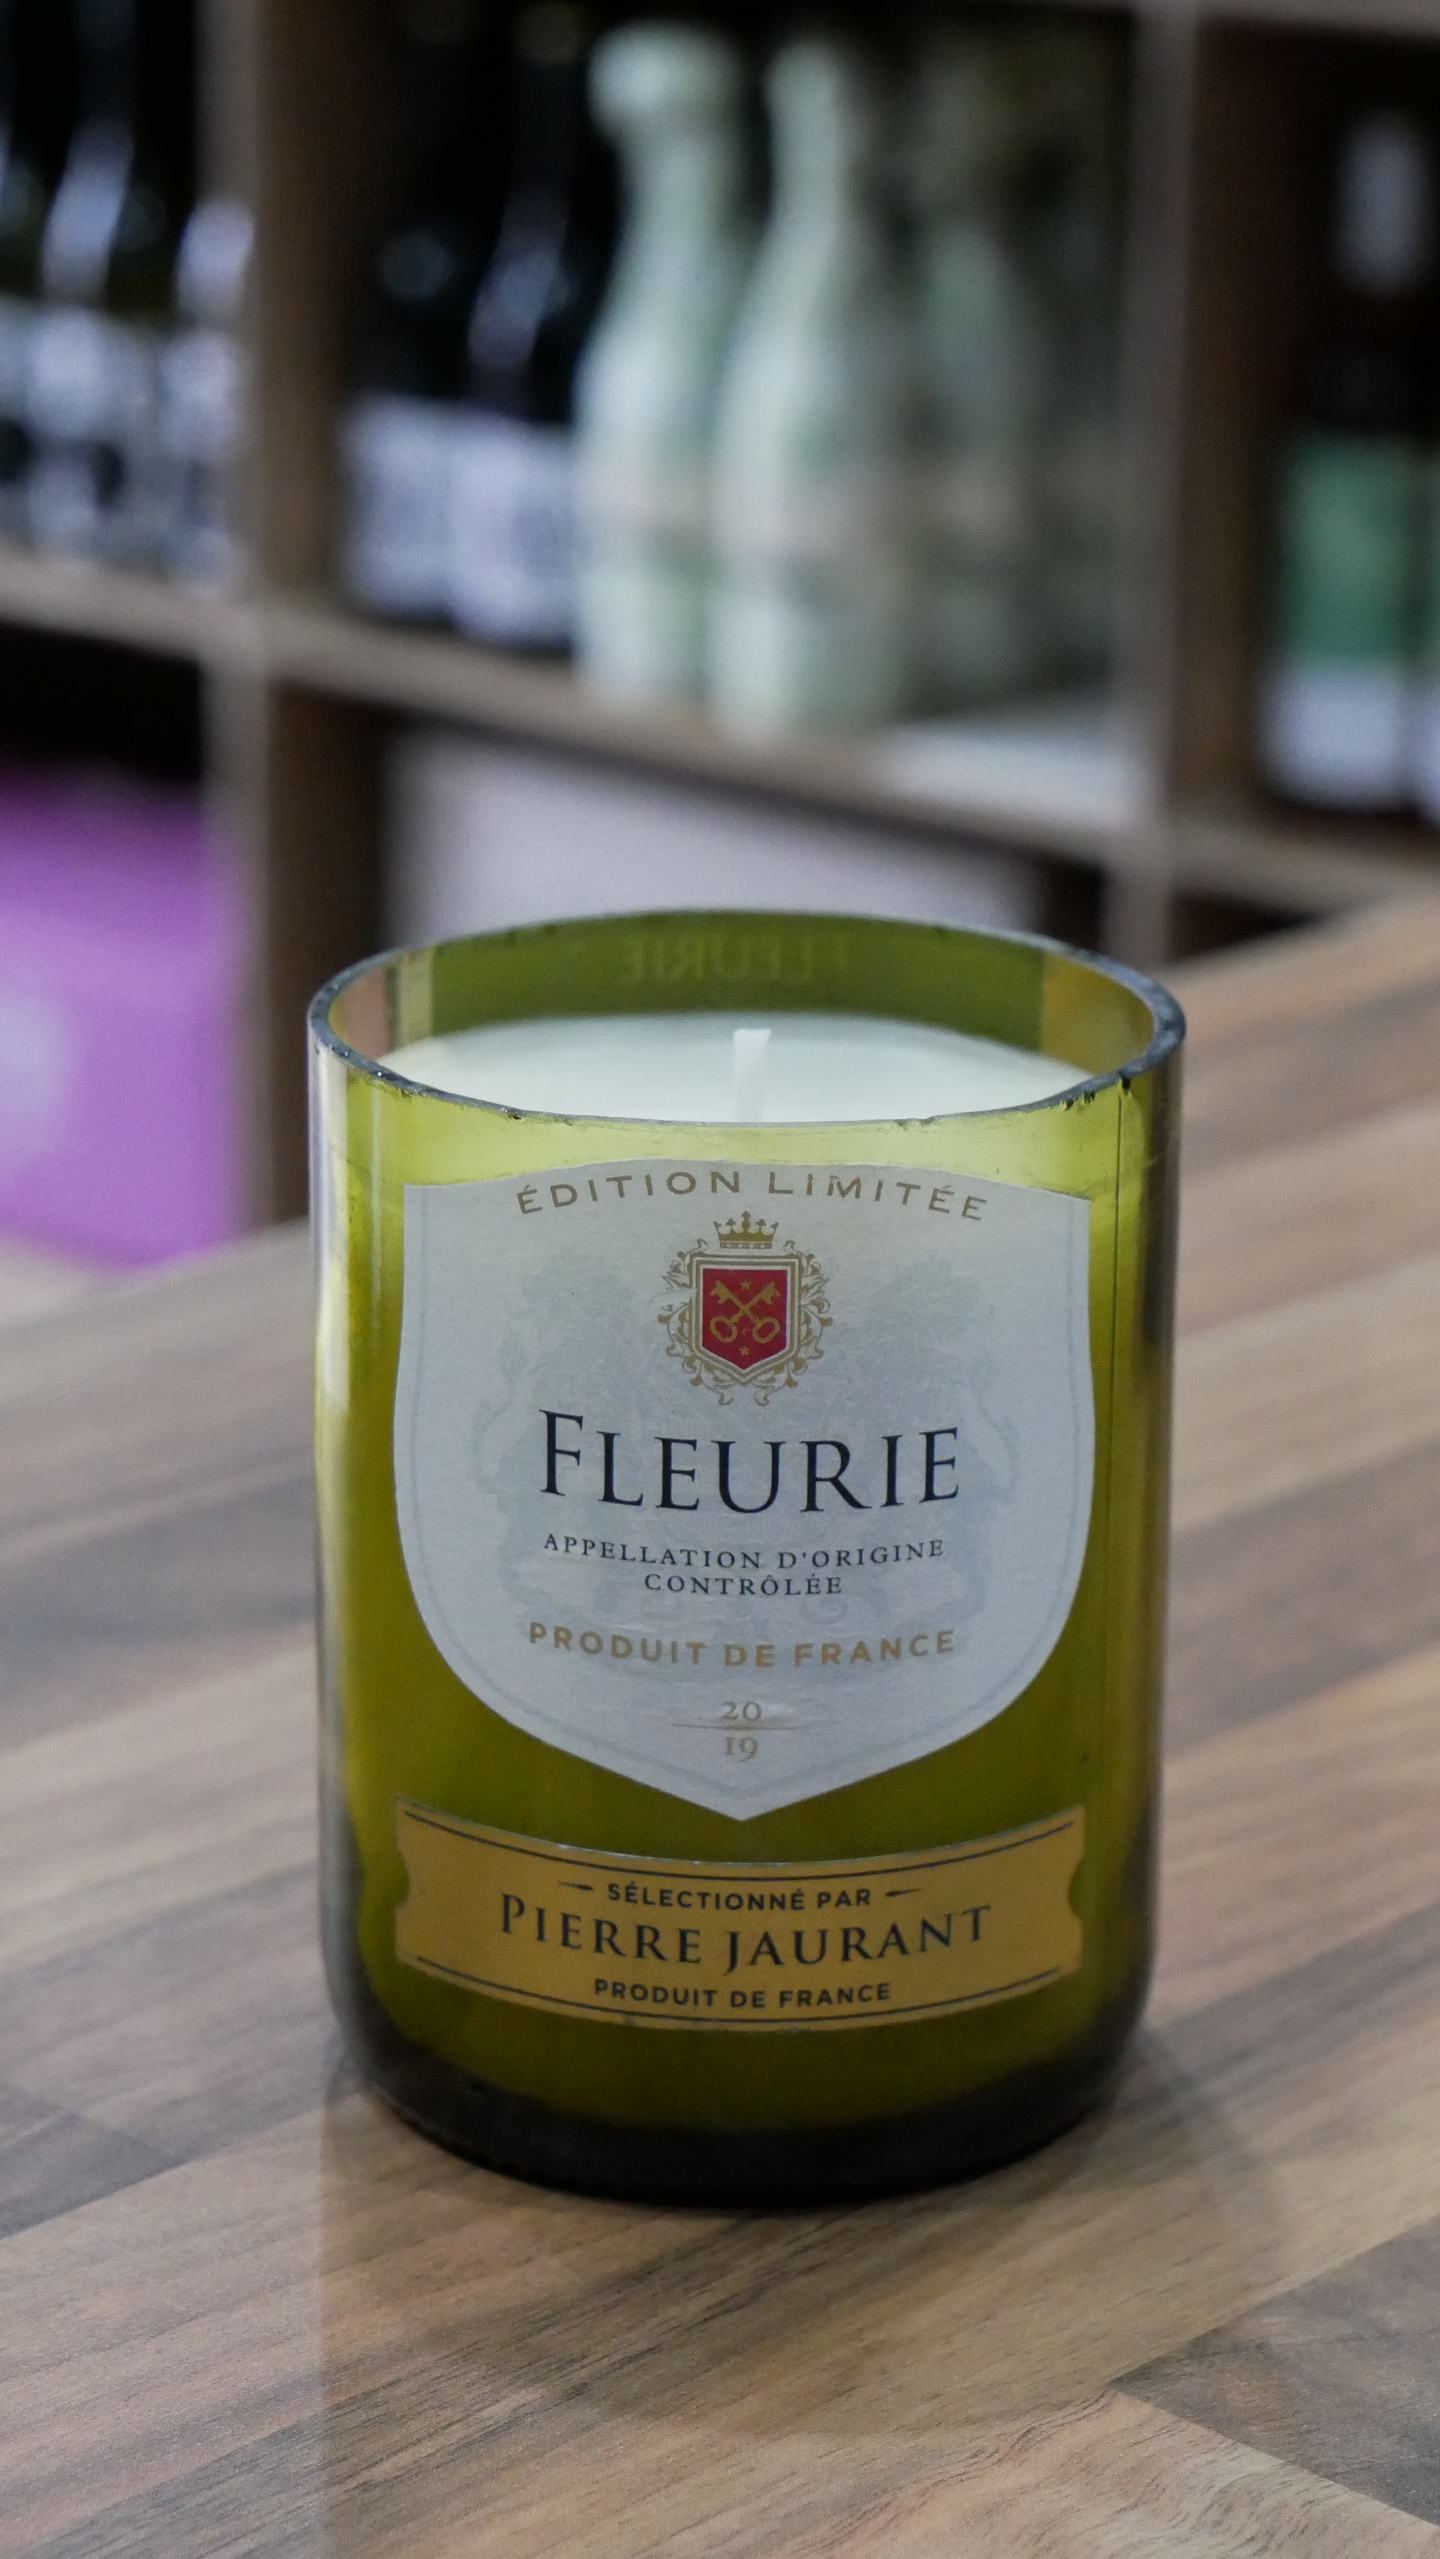 Upcycled Bottle Candle - Fleurie